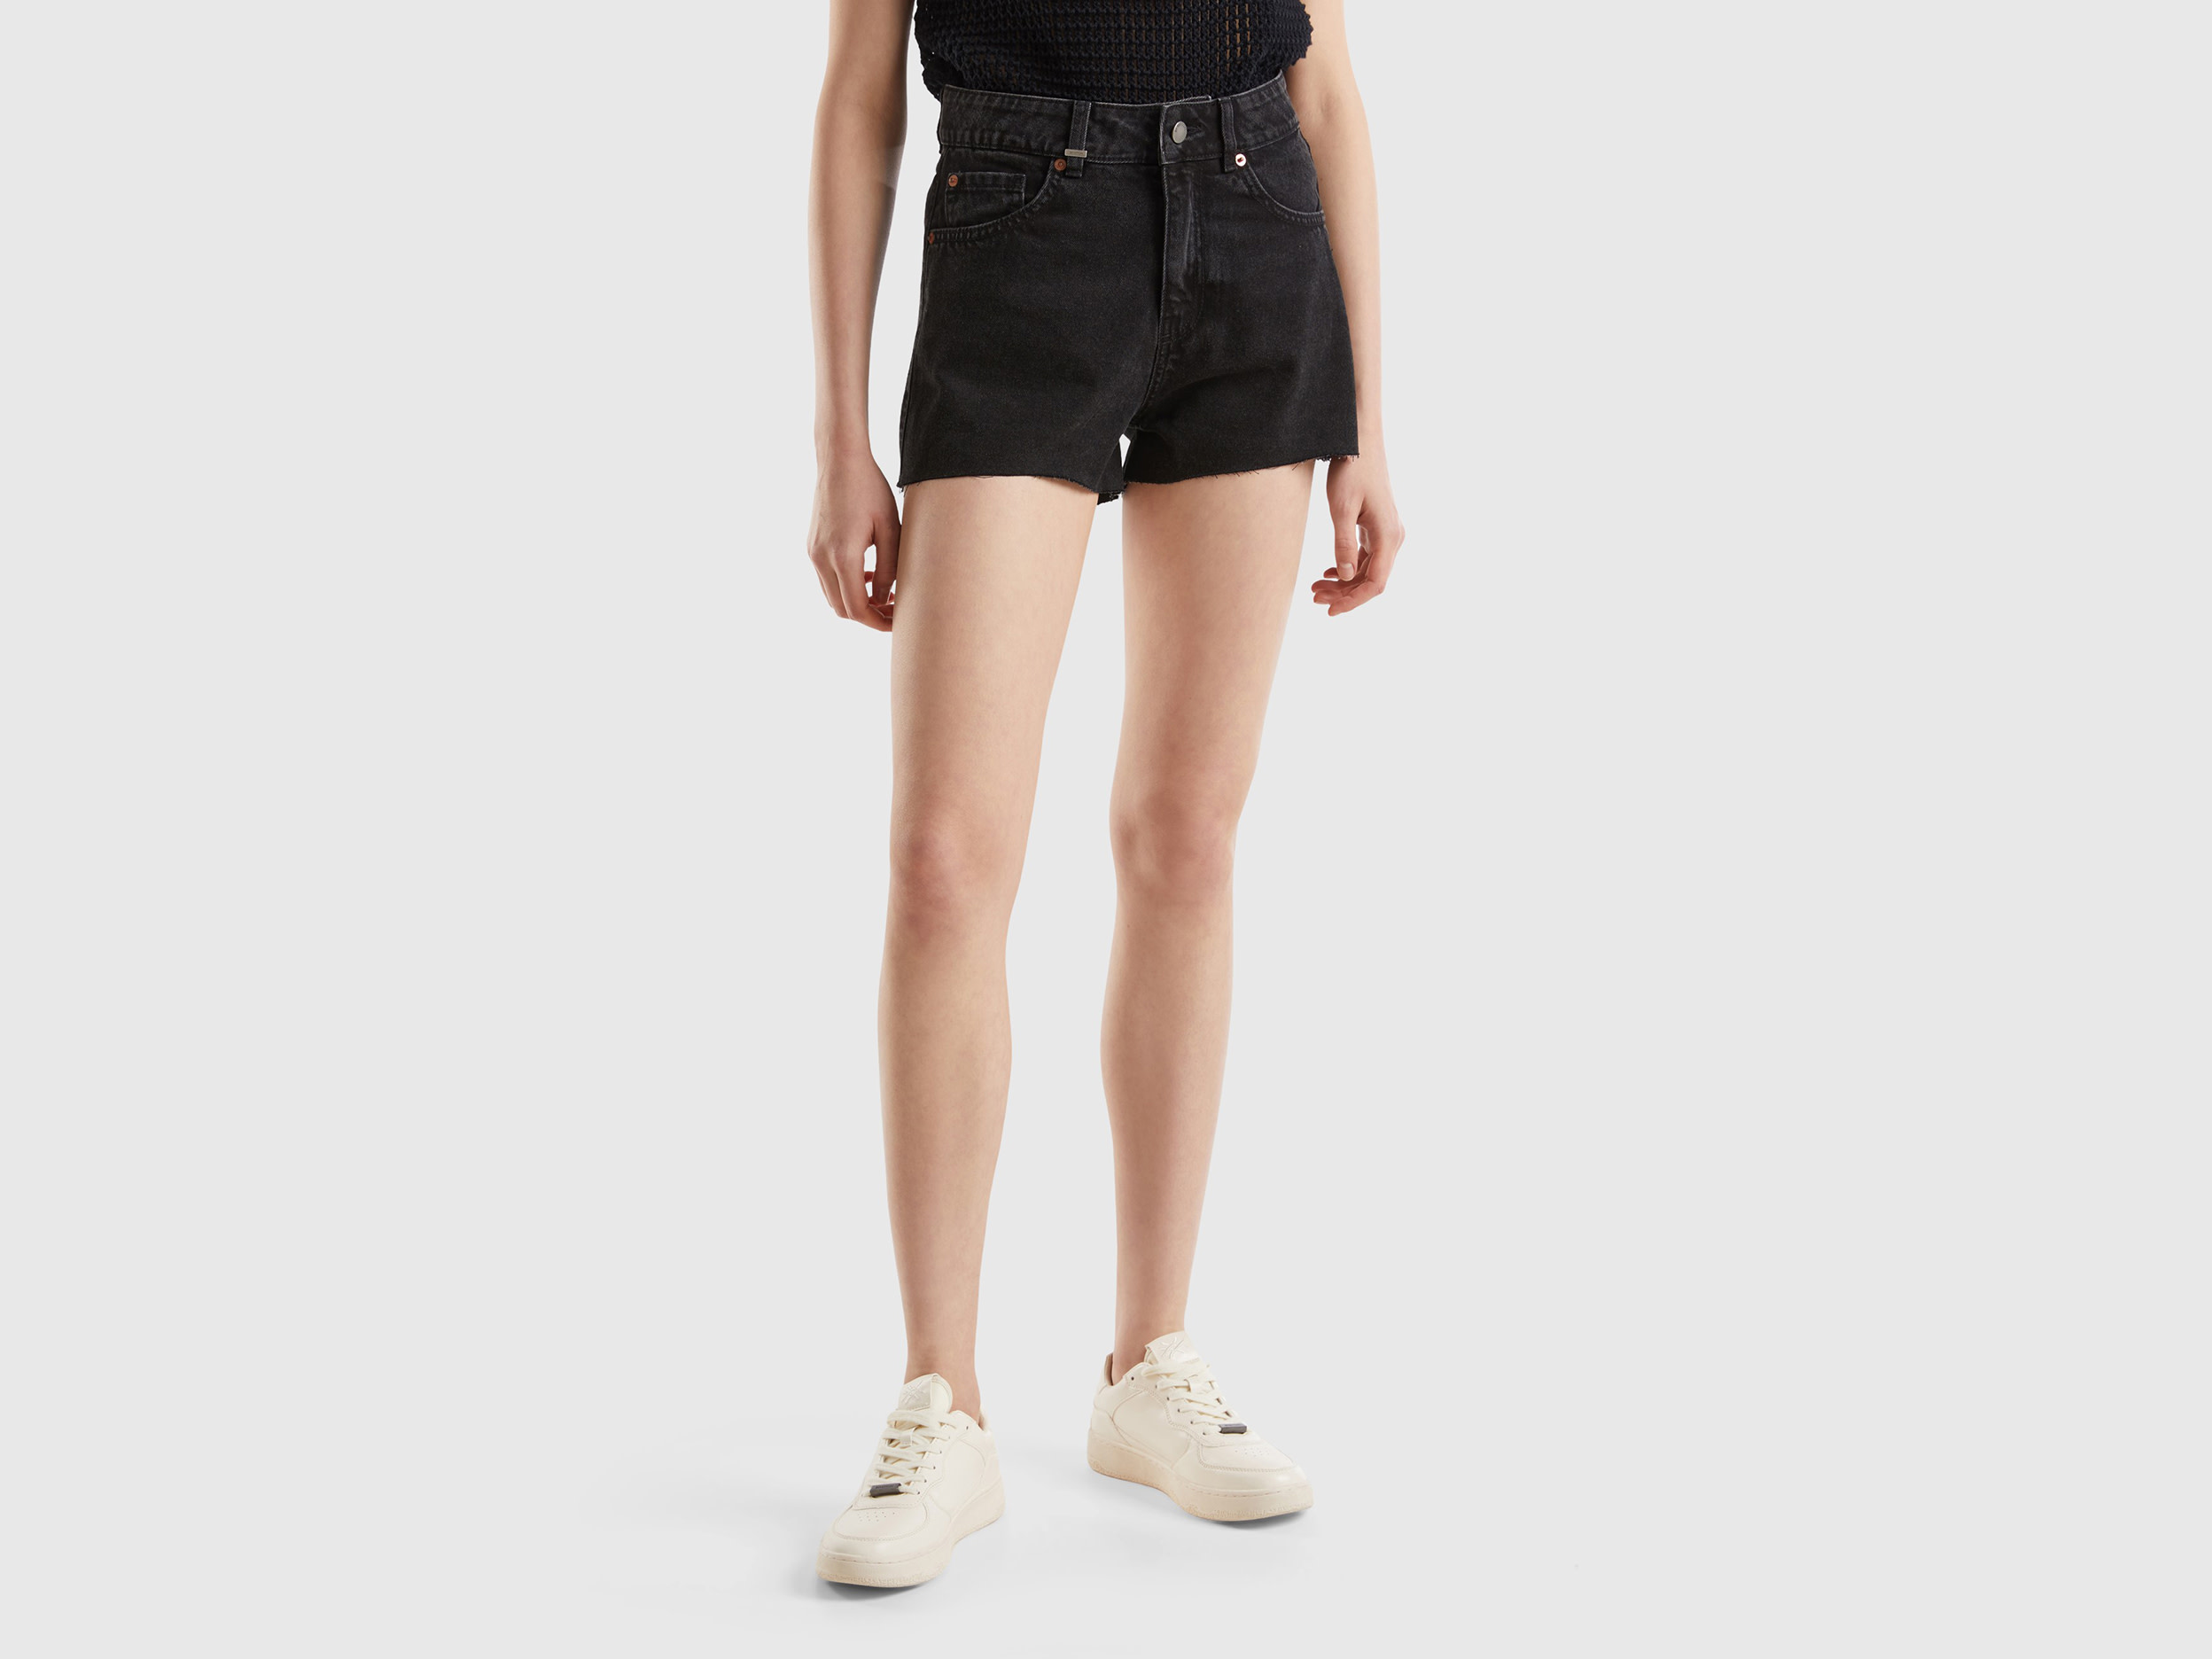 Image of Benetton, Frayed Shorts In Recycled Cotton Blend, size 30, Black, Women